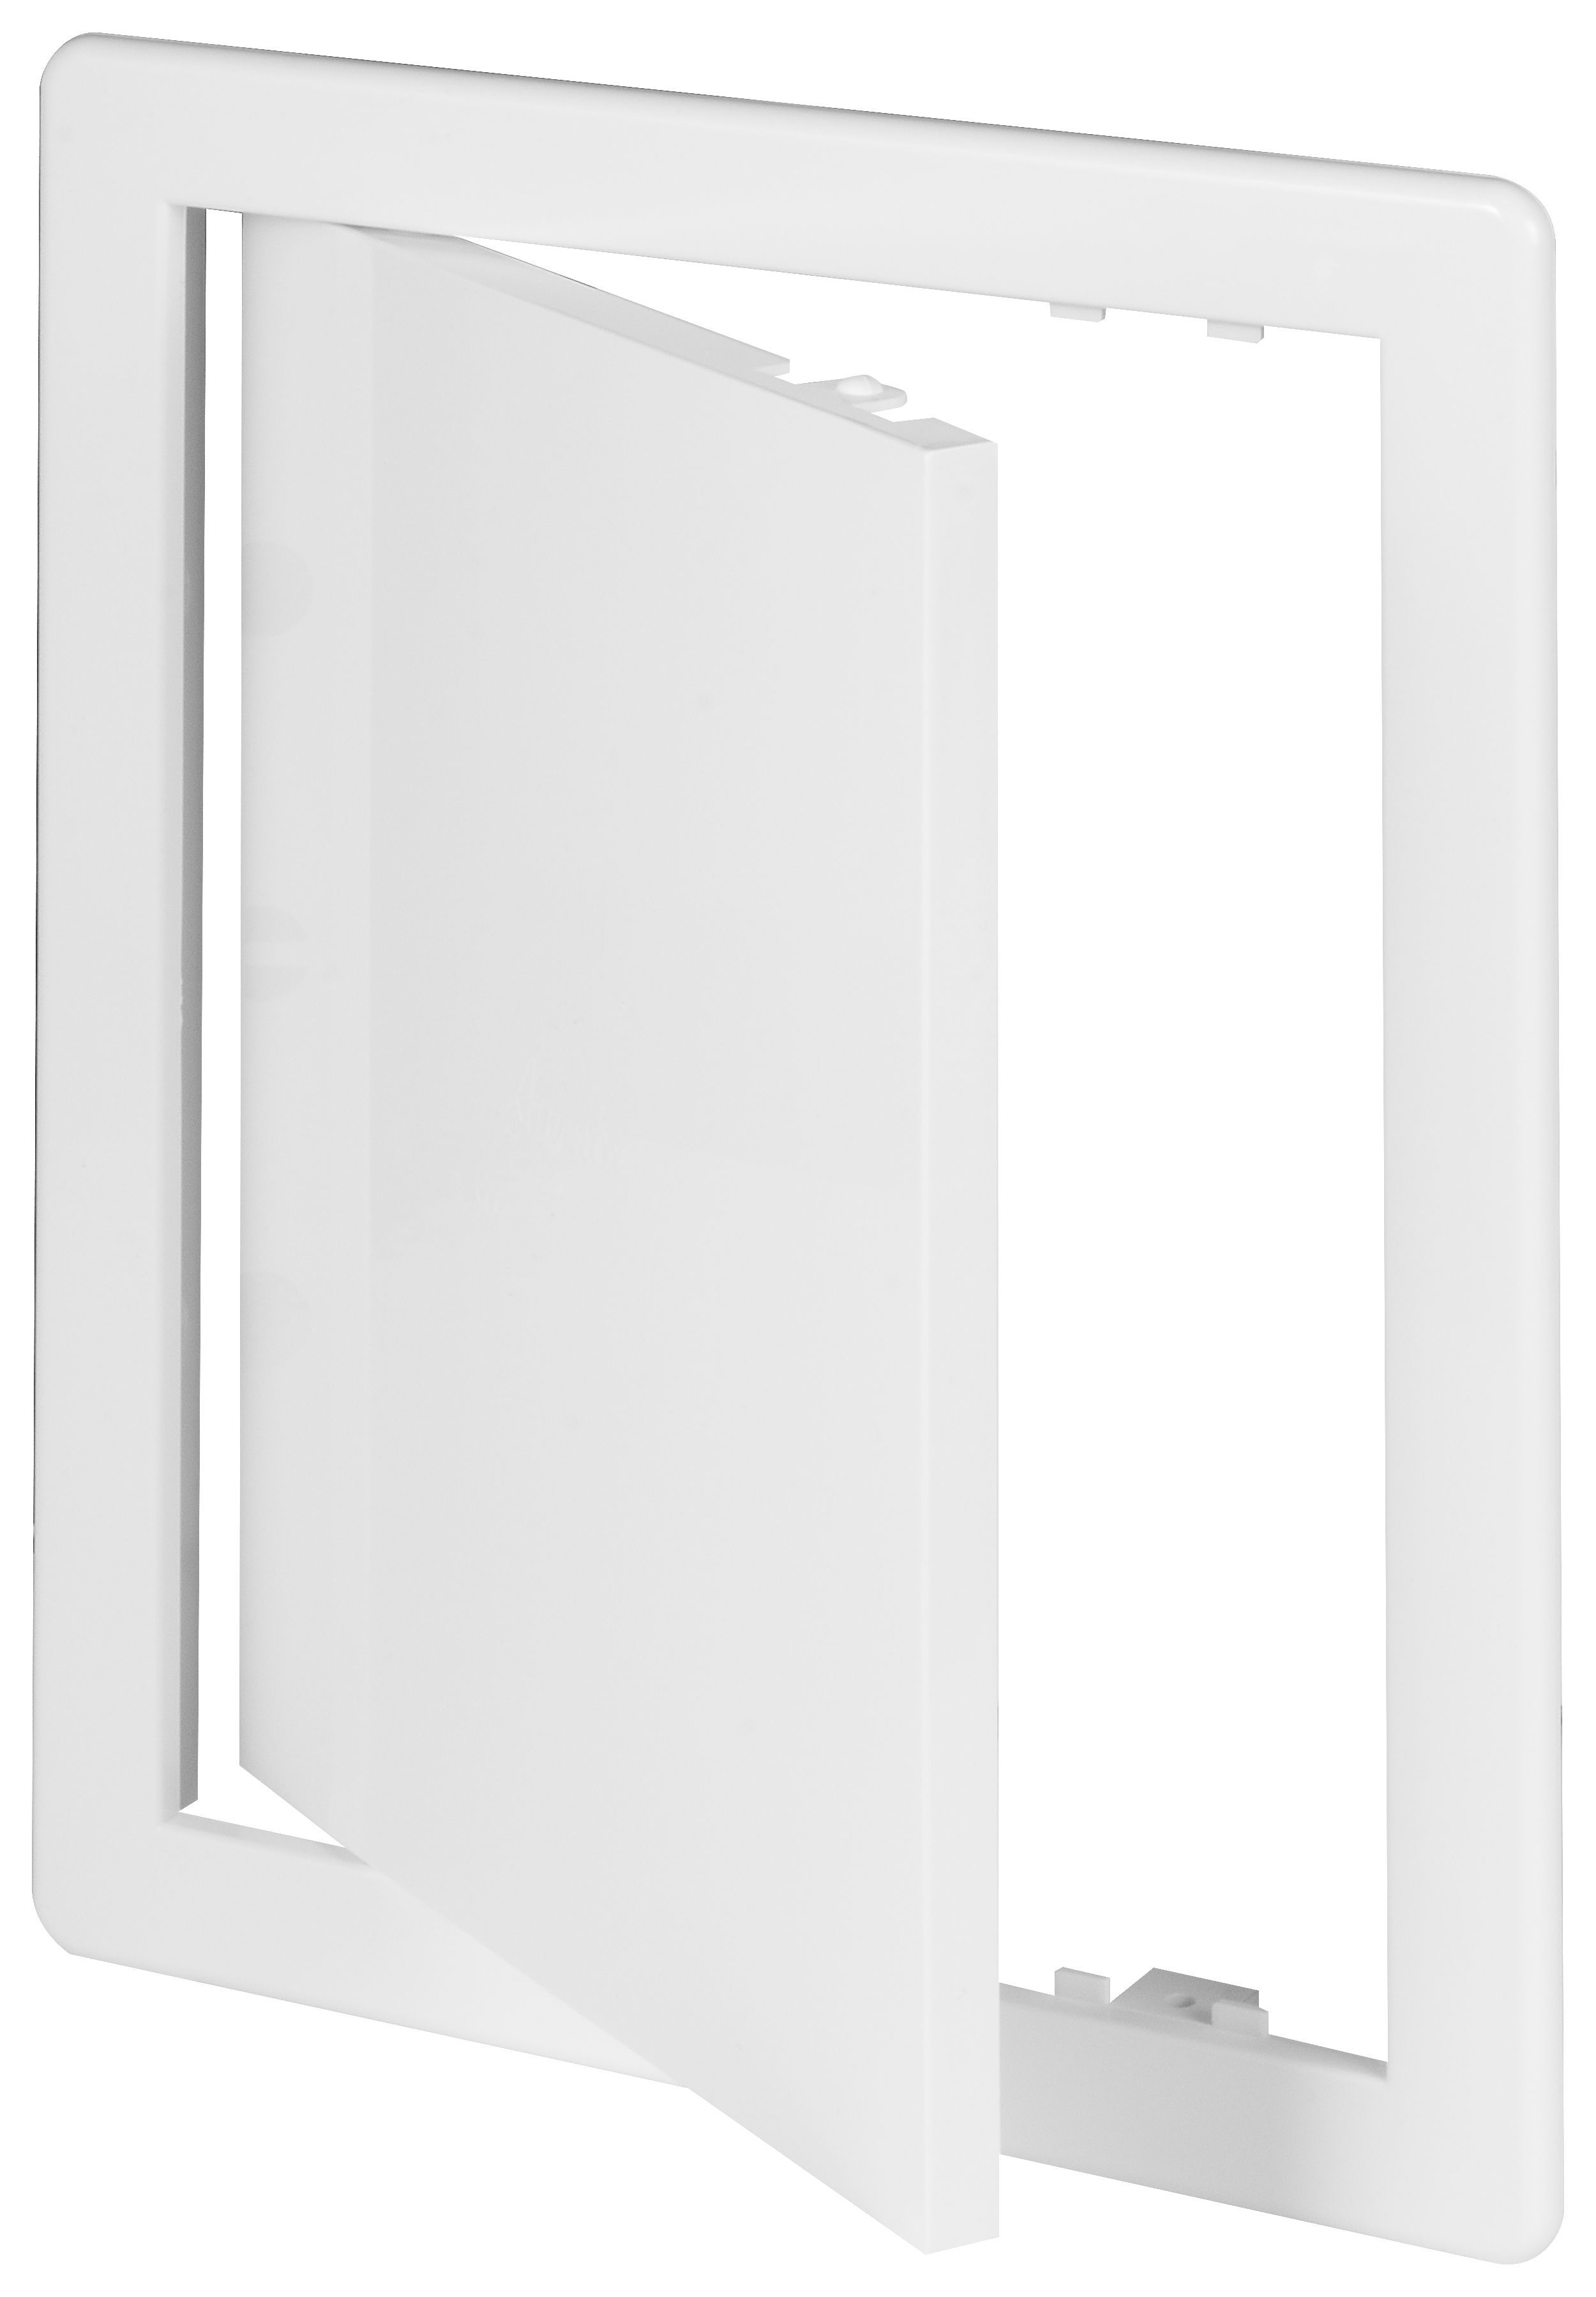 Diall White Plastic Access Panel H 218mm W 168mm Departments Diy At B Q